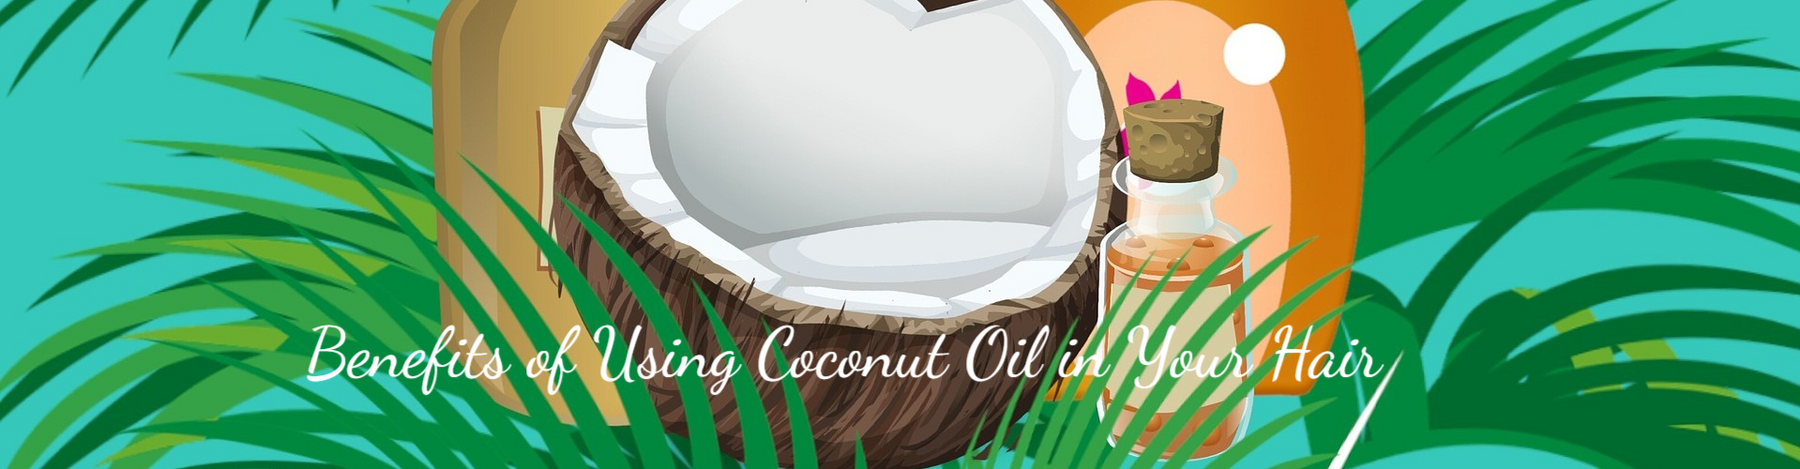 Benefits of Using Coconut Oil in Your Hair